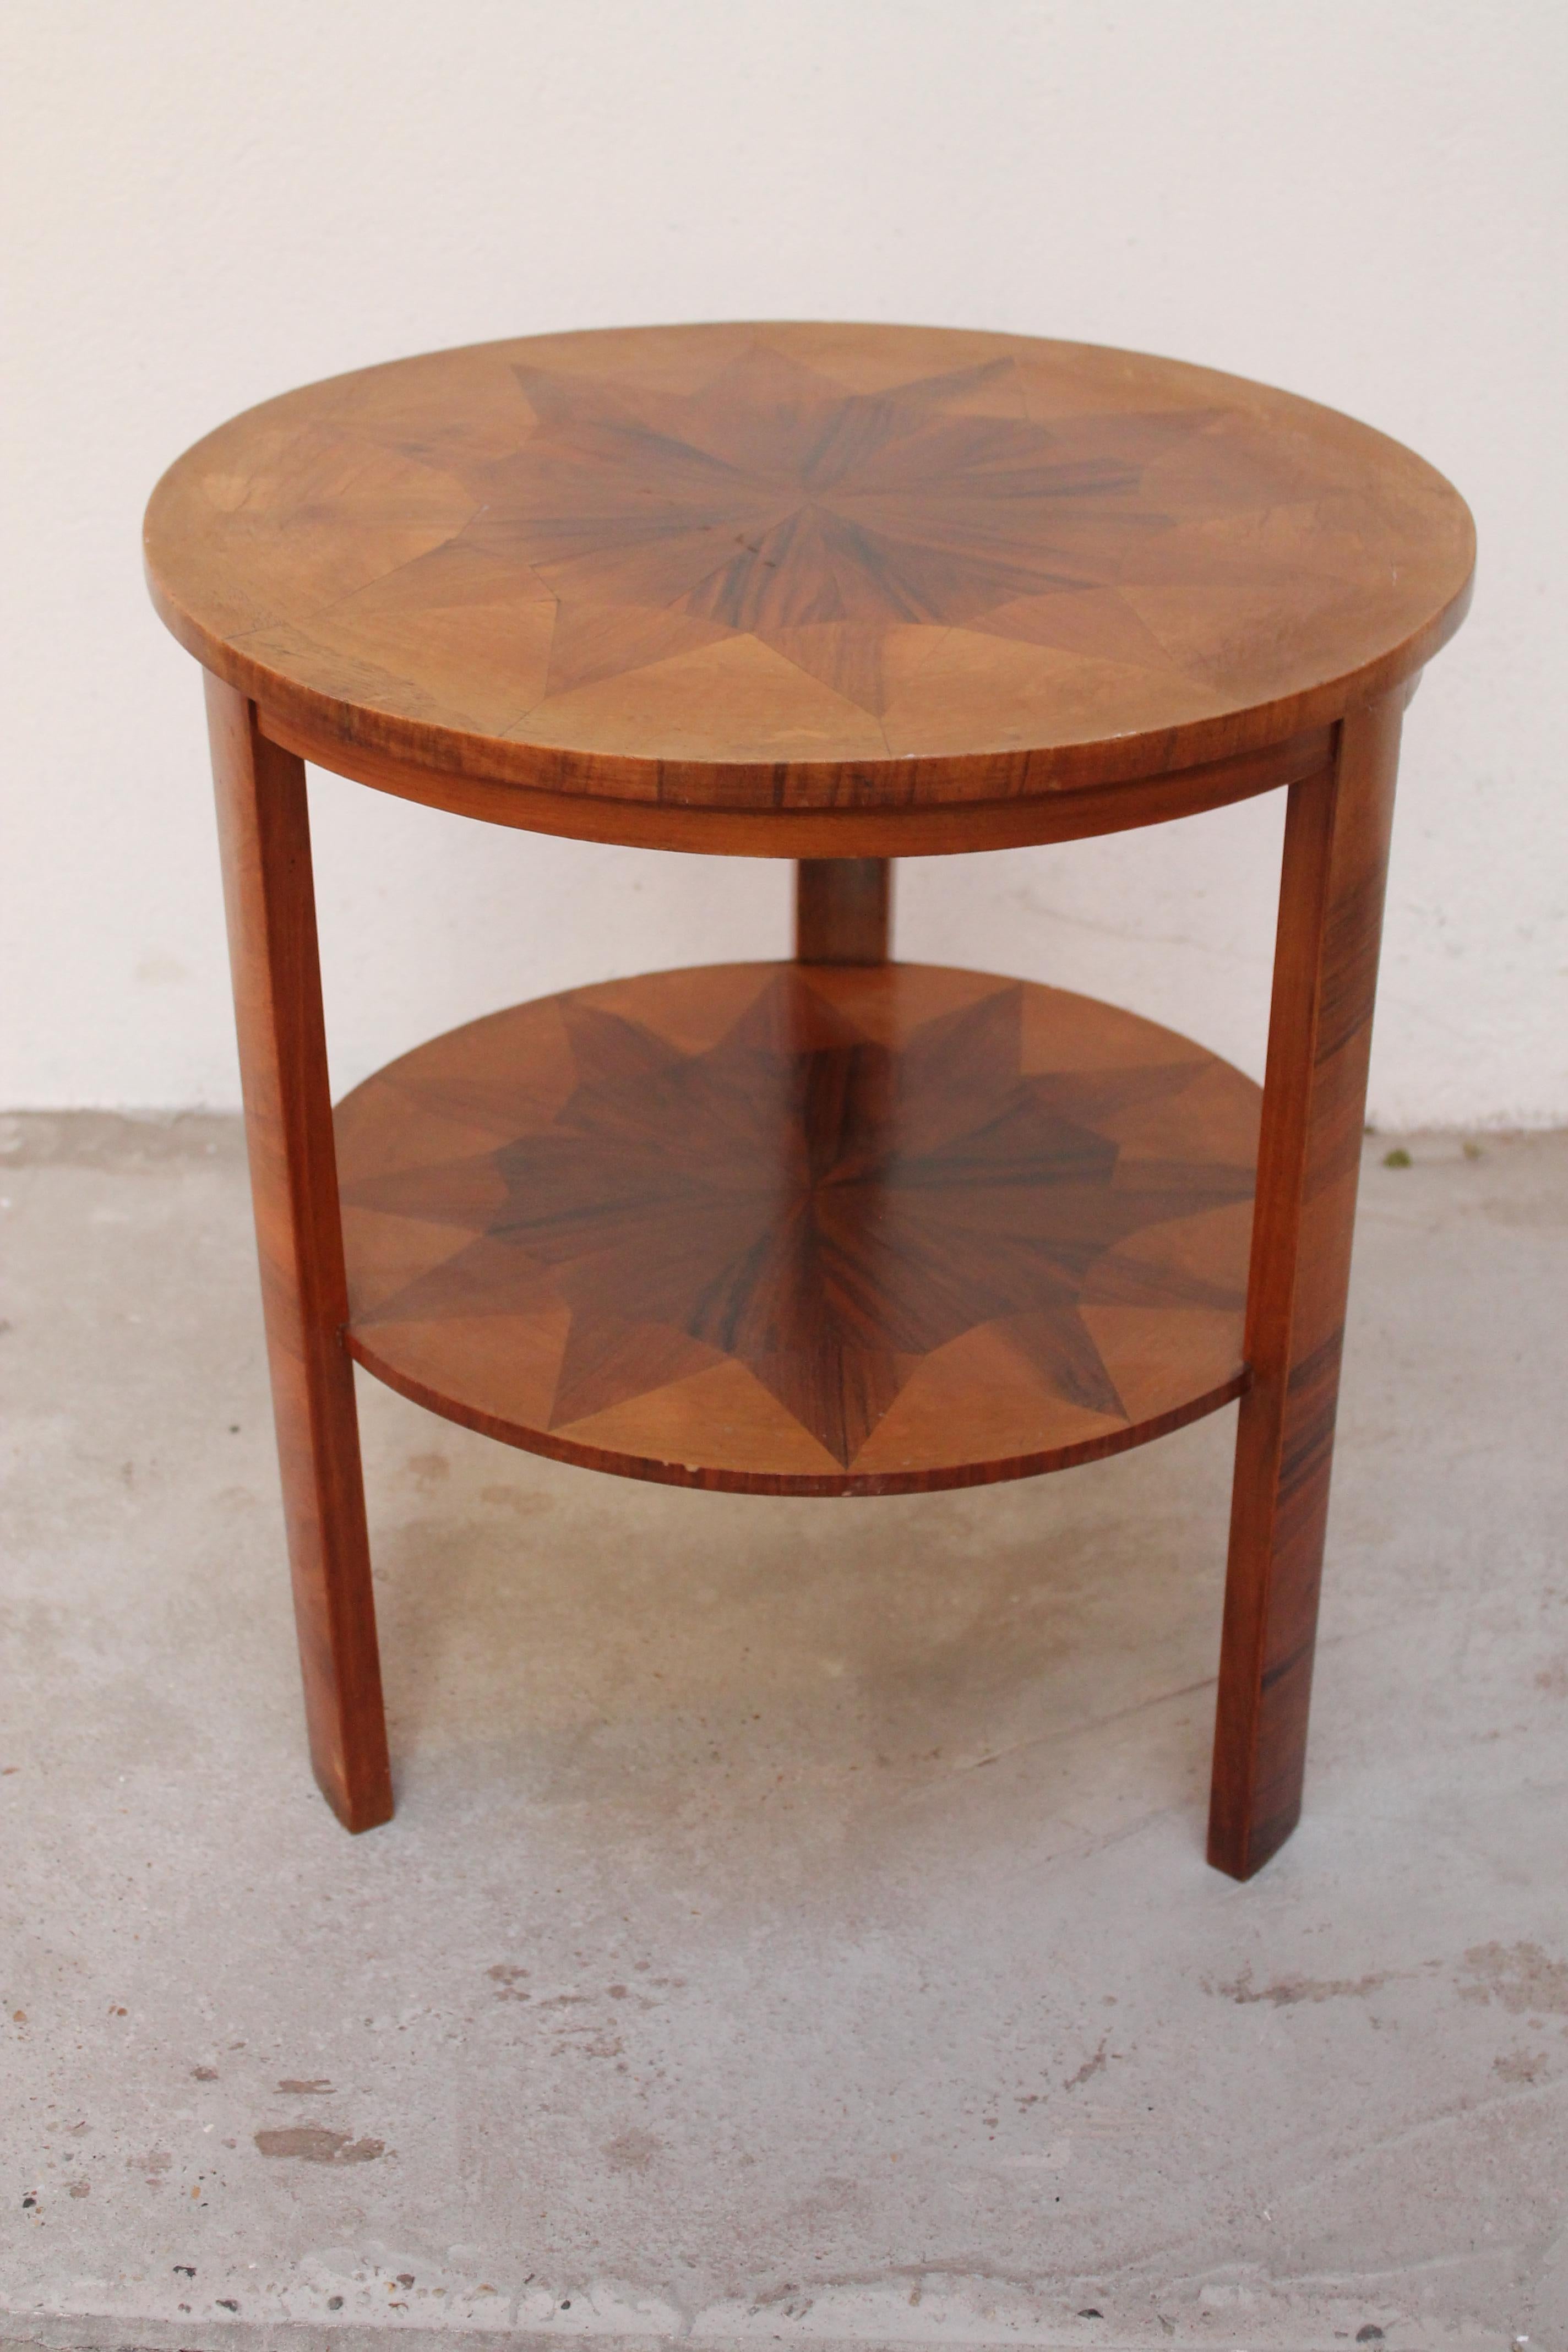 Art Deco walnut side table, French, 1930s.